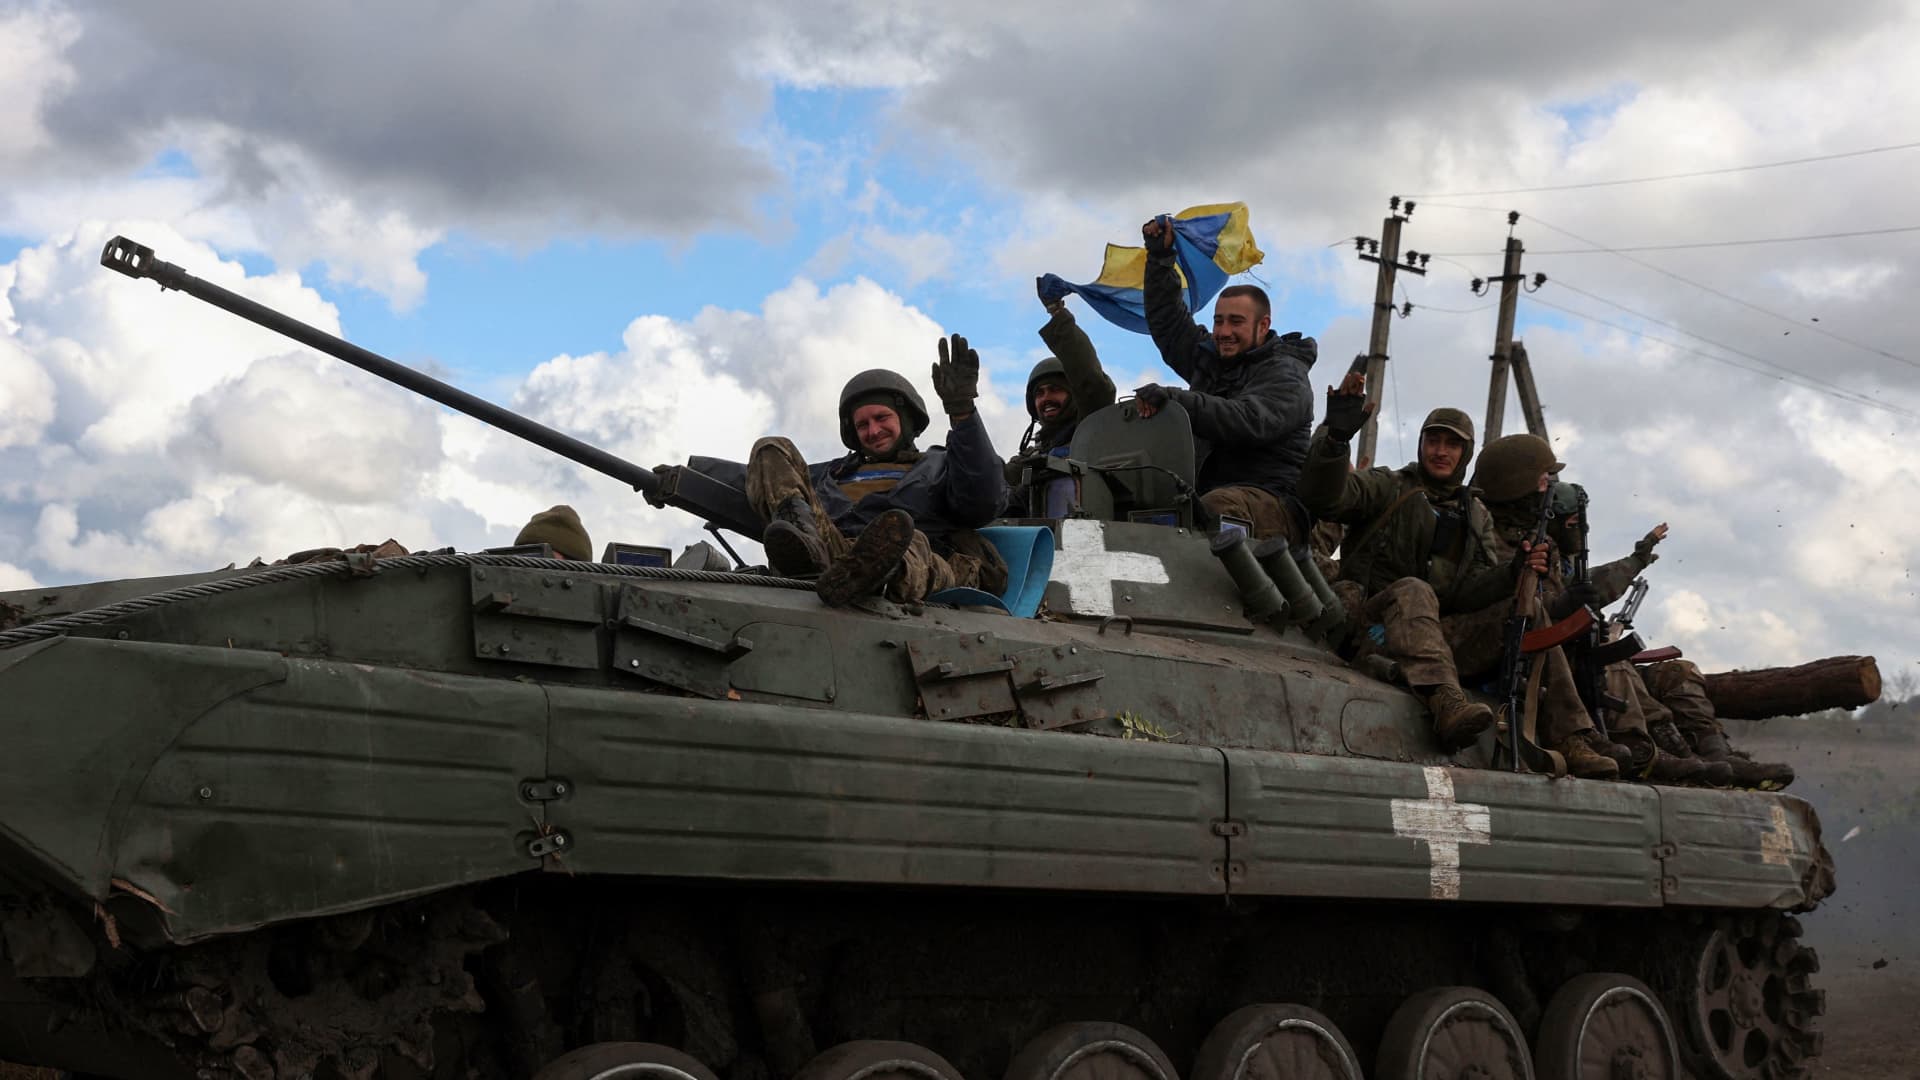 Ukrainian soldiers wave a national flag as they ride on a personnel armoured carrier on a road near Lyman, Donetsk region on October 4, 2022, amid the Russian invasion of Ukraine.